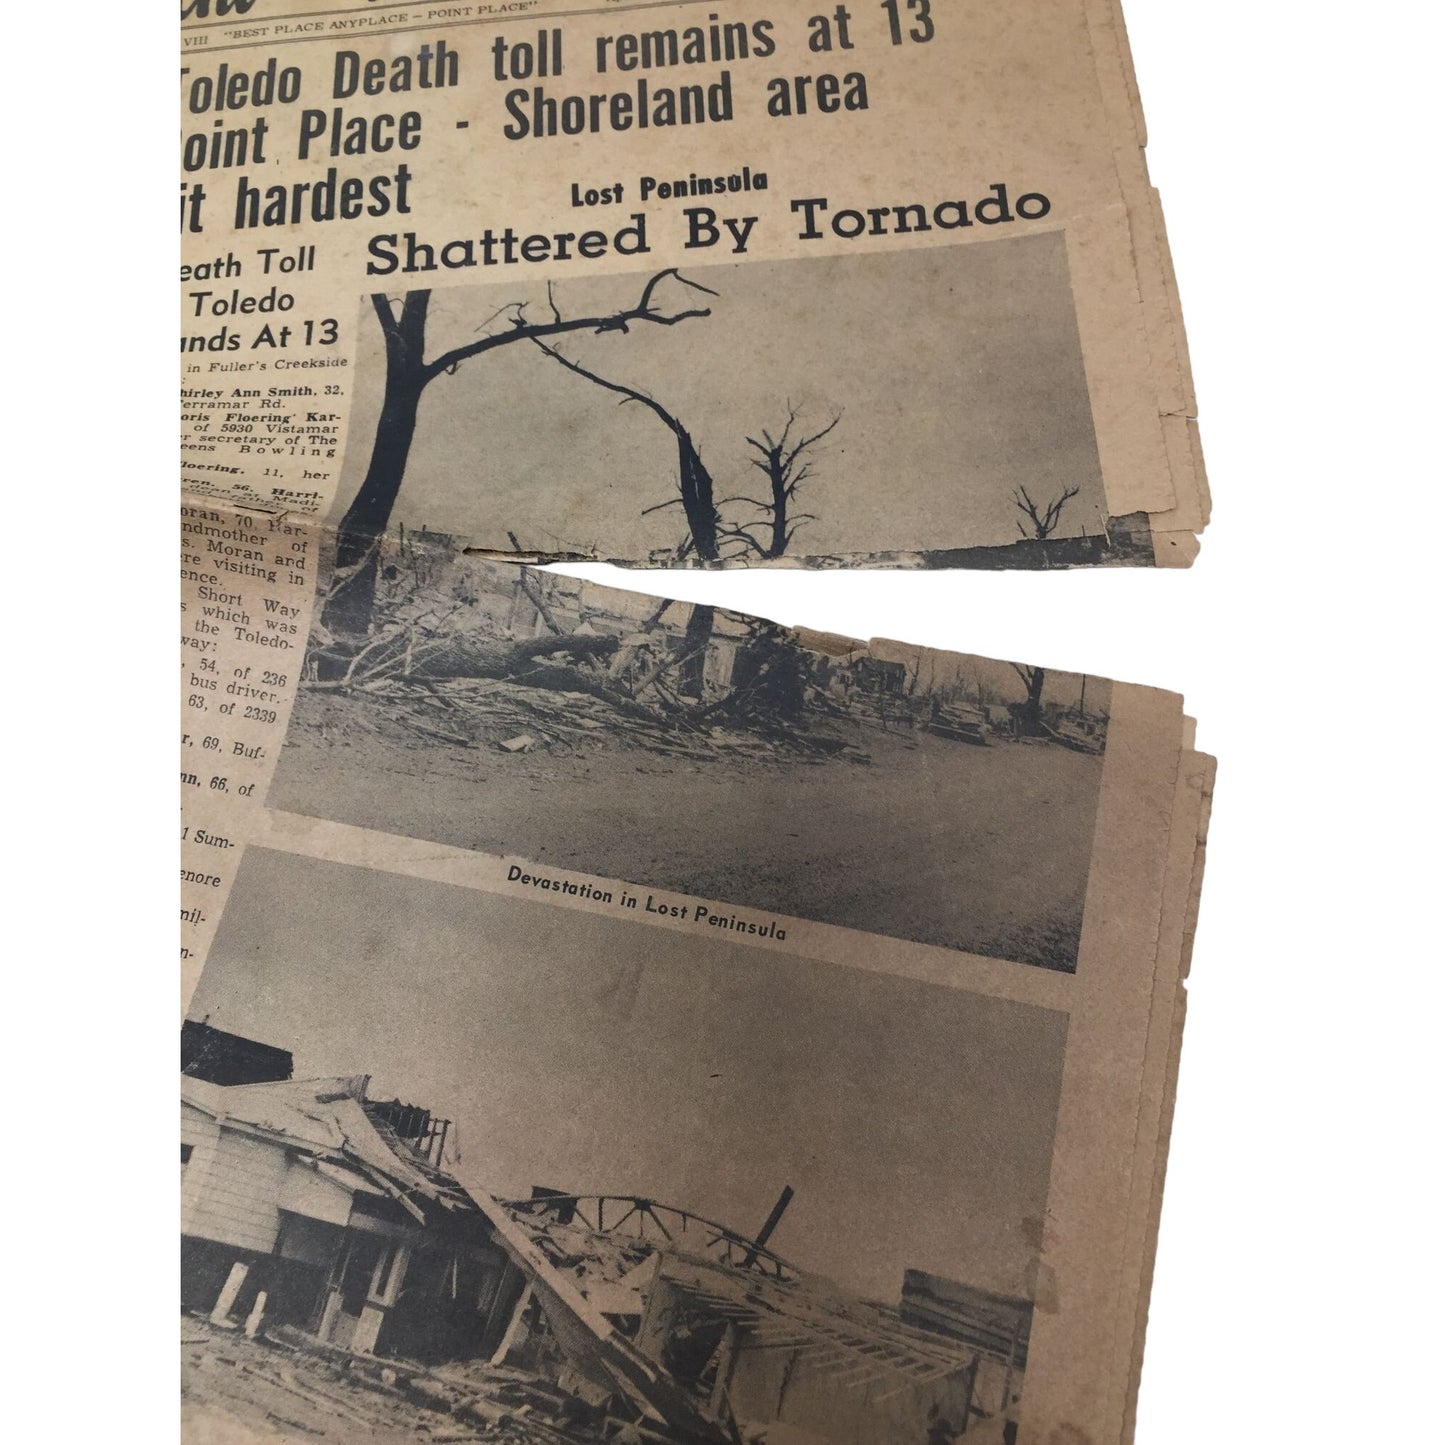 Vintage Collectible Point Place Herald April 1965 Newspaper- Toledo death tolls remains at 13 Point Place